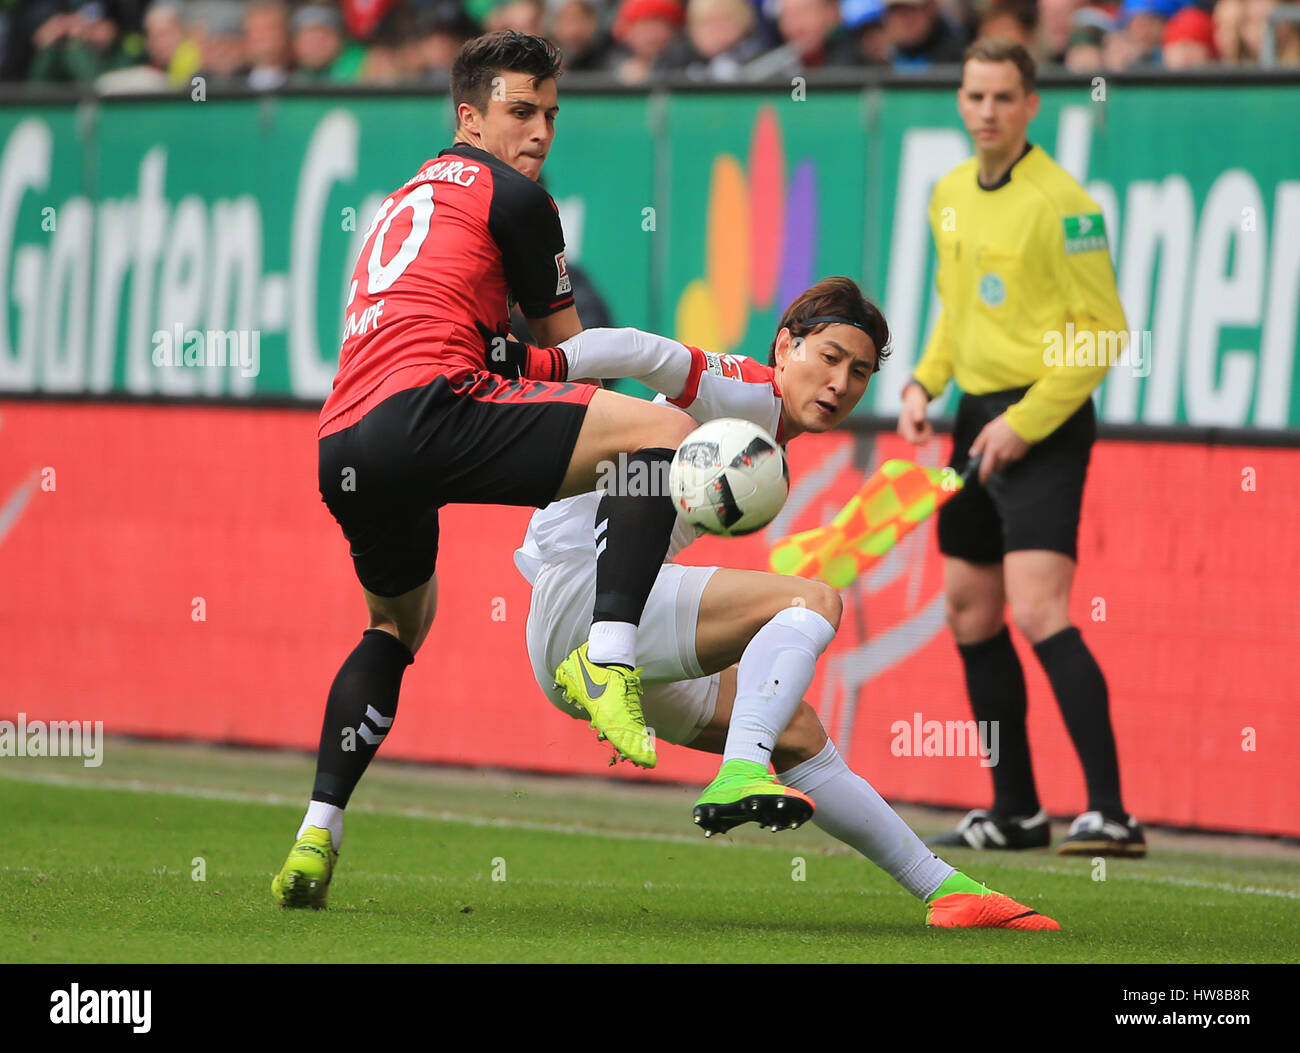 Augsburg, Germany. 18th Mar, 2017. Augsburg's Ji Dong-Won (R) vies with Freiburg's Marc-Oliver Kempf during a German Bundesliga match between FC Augsburg and SC Freiburg in Augsburg, Germany, on March 18, 2017. The match ended in a 1-1 draw. Credit: Philippe Ruiz/Xinhua/Alamy Live News Stock Photo